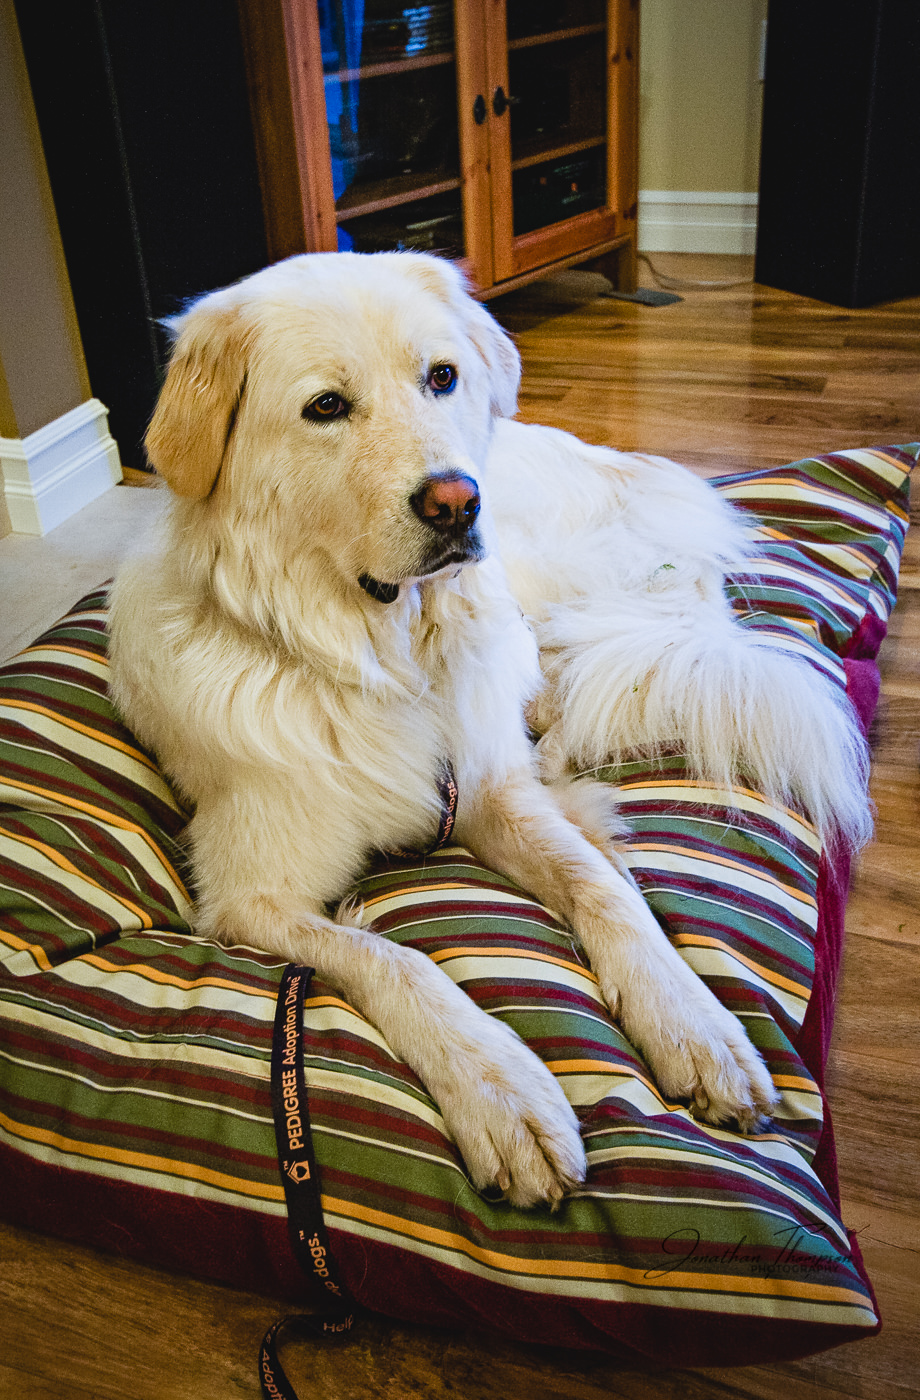 A young Pyrenees Mountain Dog called Tundra laying down on a stripy bed and alert